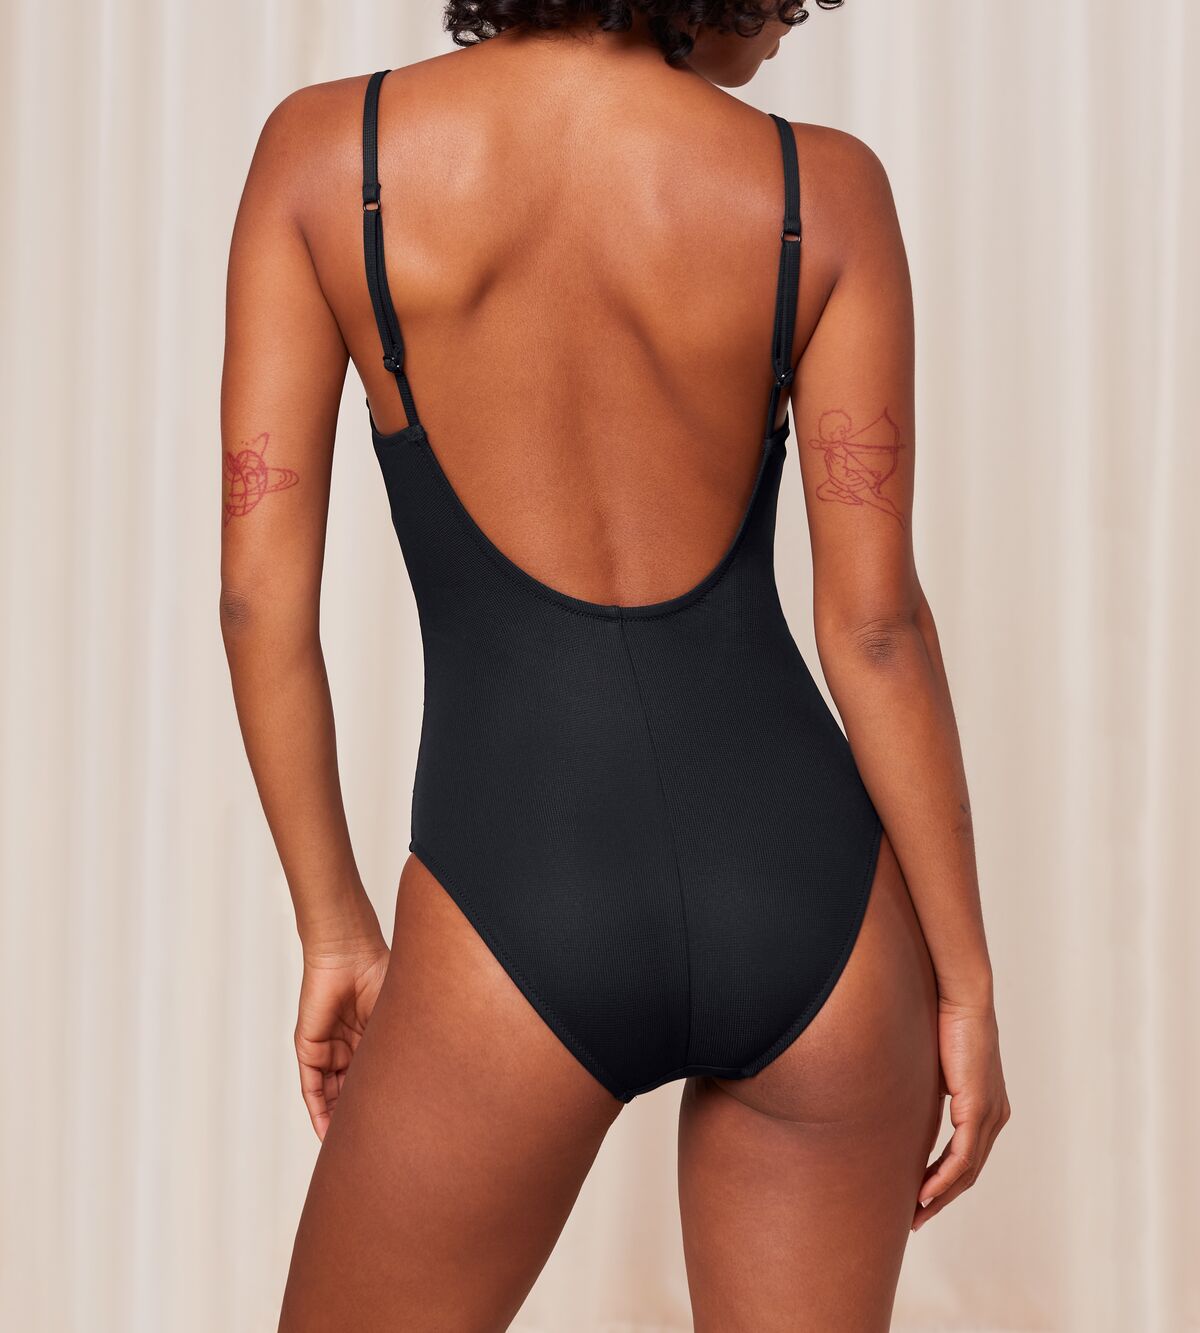 Triumph Summer Glow Padded Swimsuit - Black 4 Shaws Department Stores